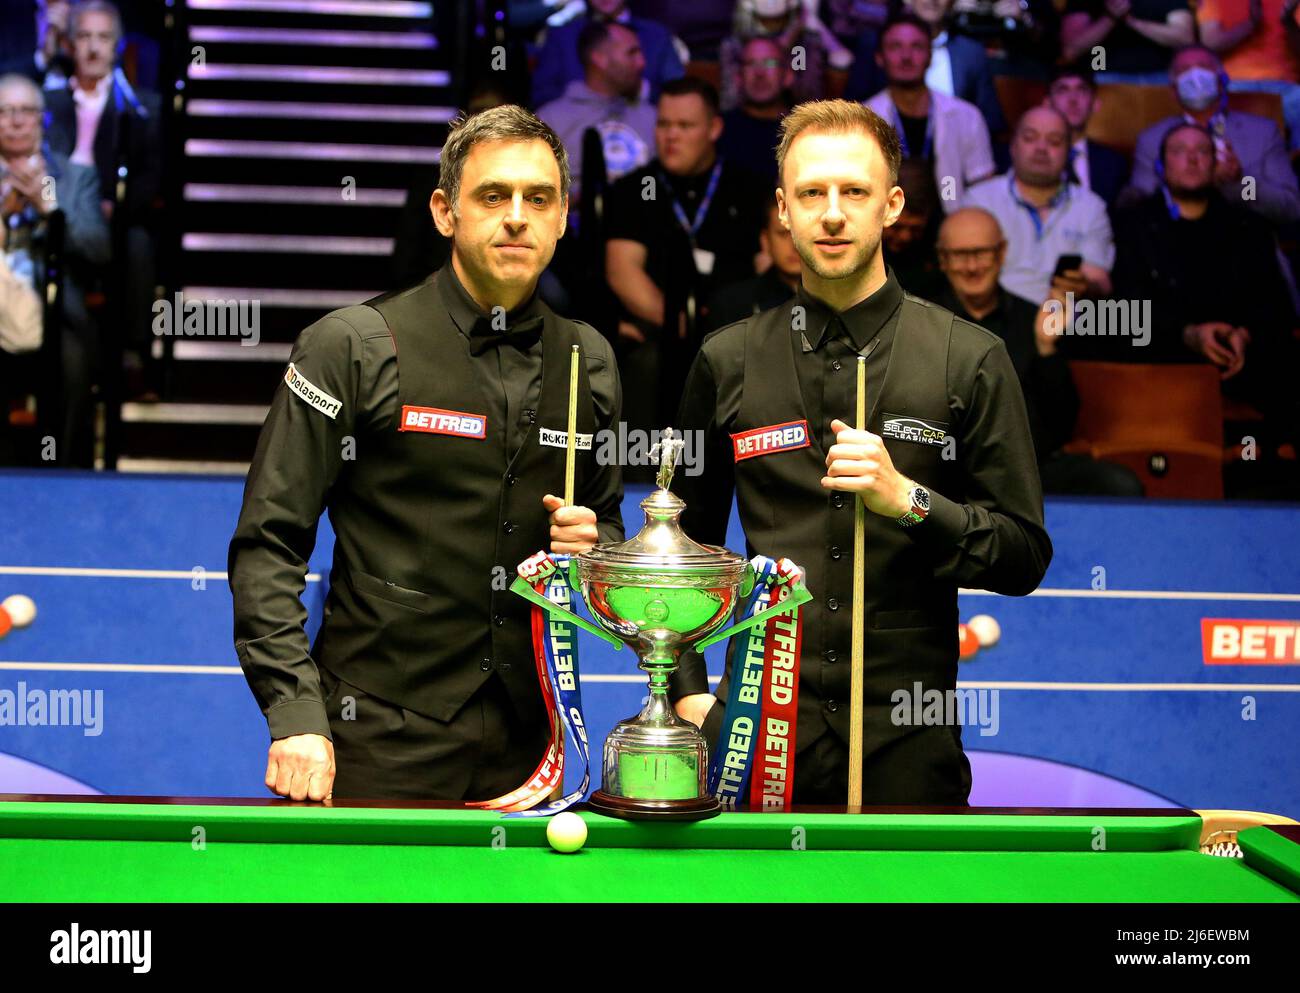 May 1st 2022 Crucible Theatre, Sheffield Yorkshire, England; Betfred World Championship Snooker Final, Ronnie OSullivan